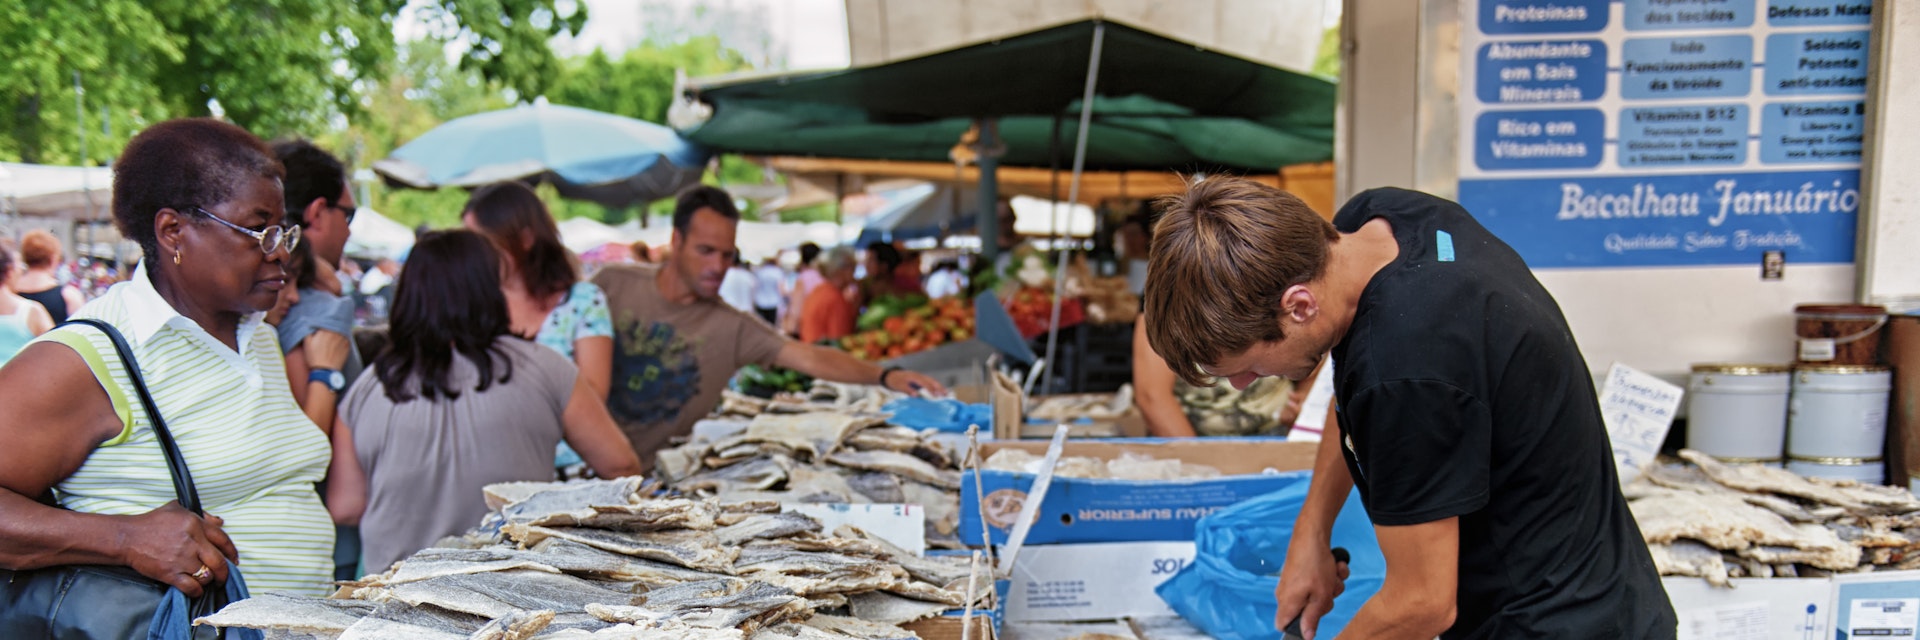 Barcelos, Portugal - August 23, 2012: A man is cutting bacalhau during the market day. Bacalhau dishes are very common in Portugal.; Shutterstock ID 241520329; Your name (First / Last): Tom Stainer; GL account no.: 65050 ; Netsuite department name: Online Editorial; Full Product or Project name including edition: Best in Travel 2018